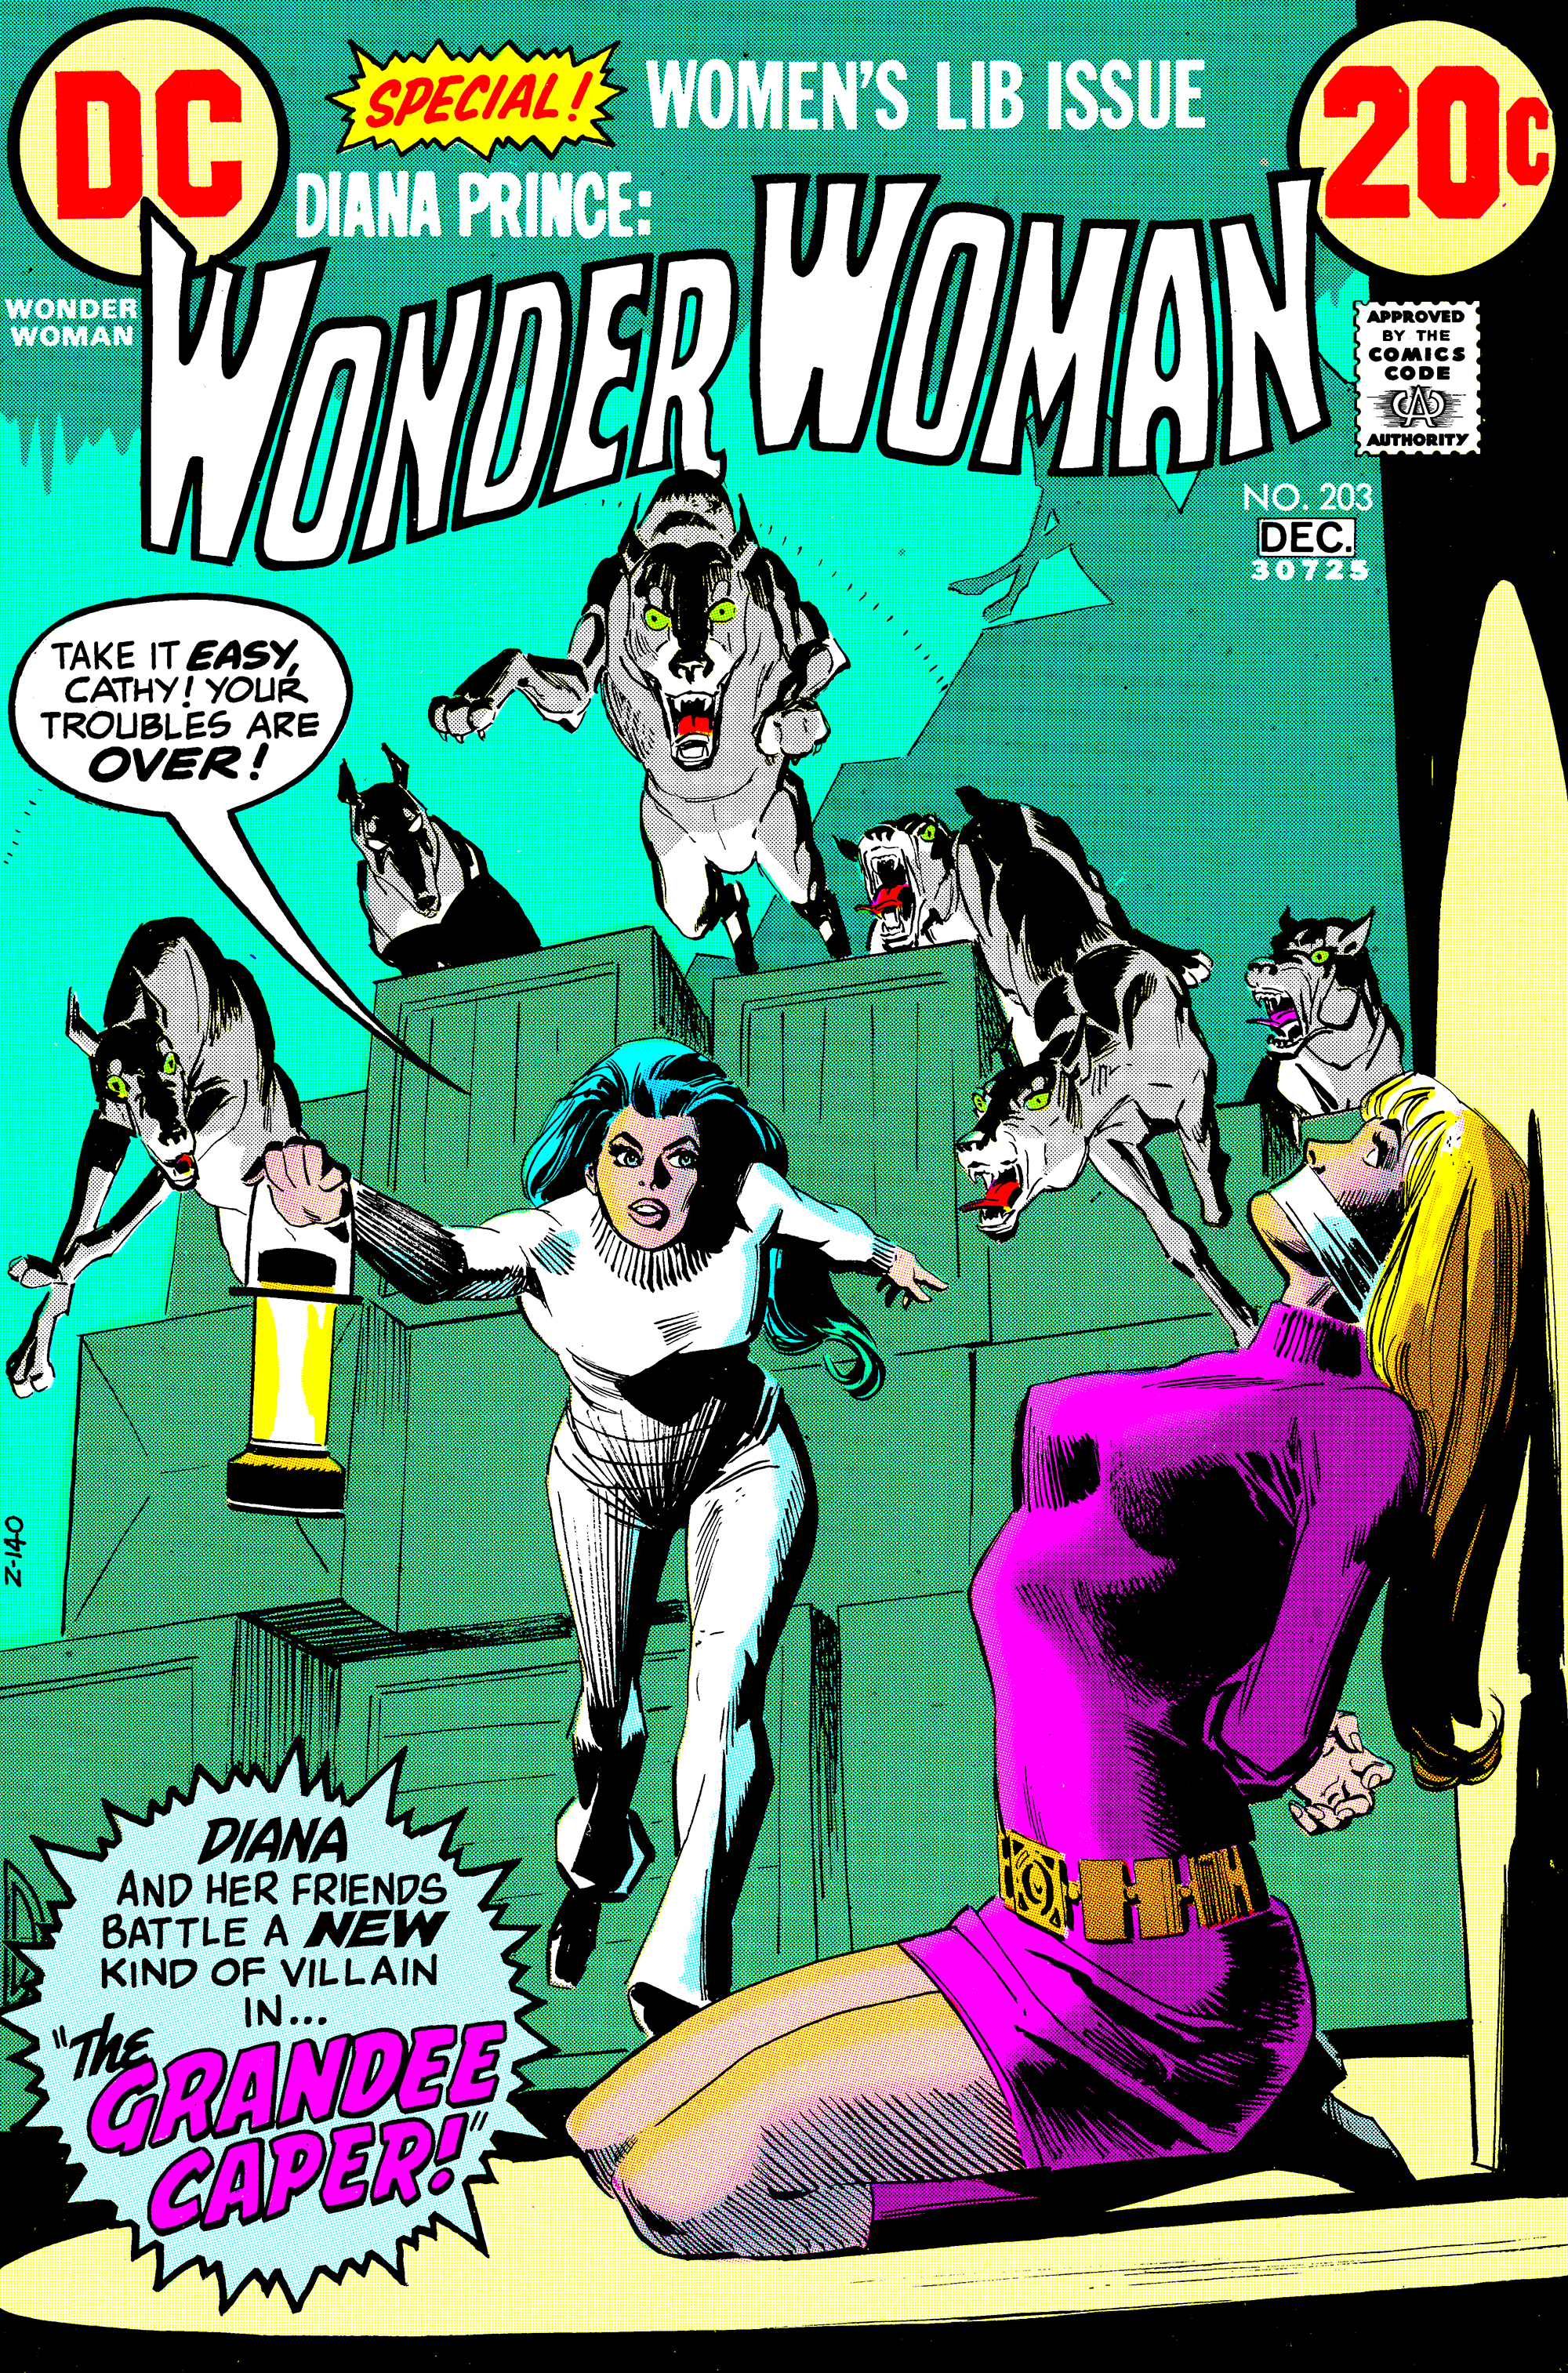 1972: In this one-off  Women's Lib Issue,   Wonder Woman battles employers who won't pay women equal wages.